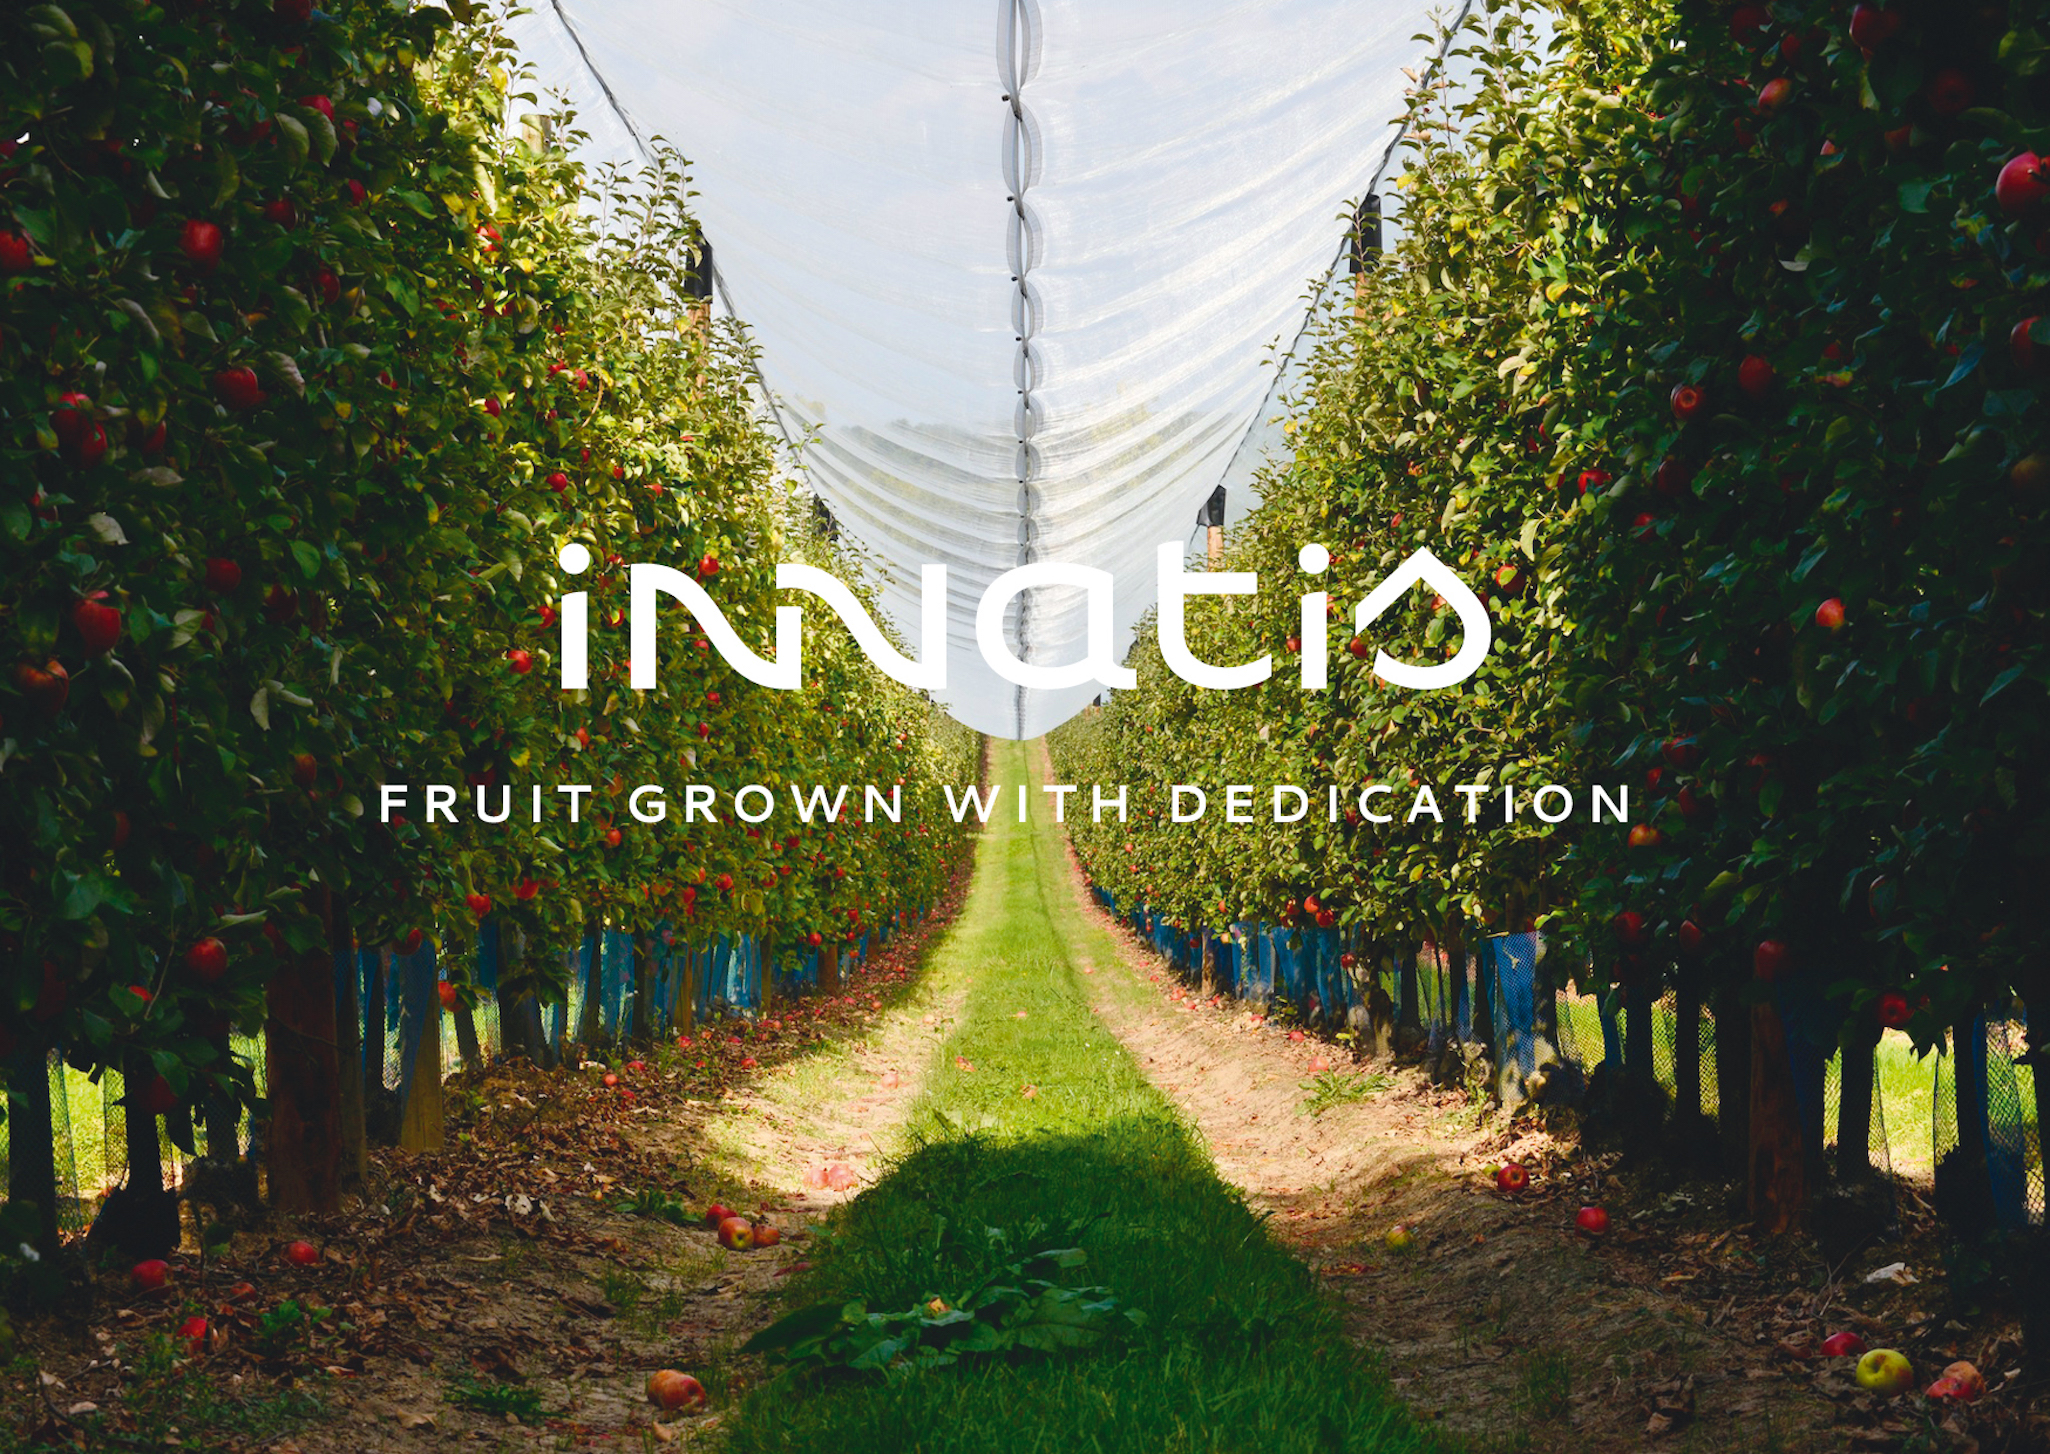 ‘In’ stands for innovation, ’na’ for nature, ’t’ for tradition and know-how, and ‘is’ represents an ending that is open with promise of longevity and prosperity for Innatis! Together, the name reflects Innatis’s core values: innovating with nature to grow fruit with dedication.